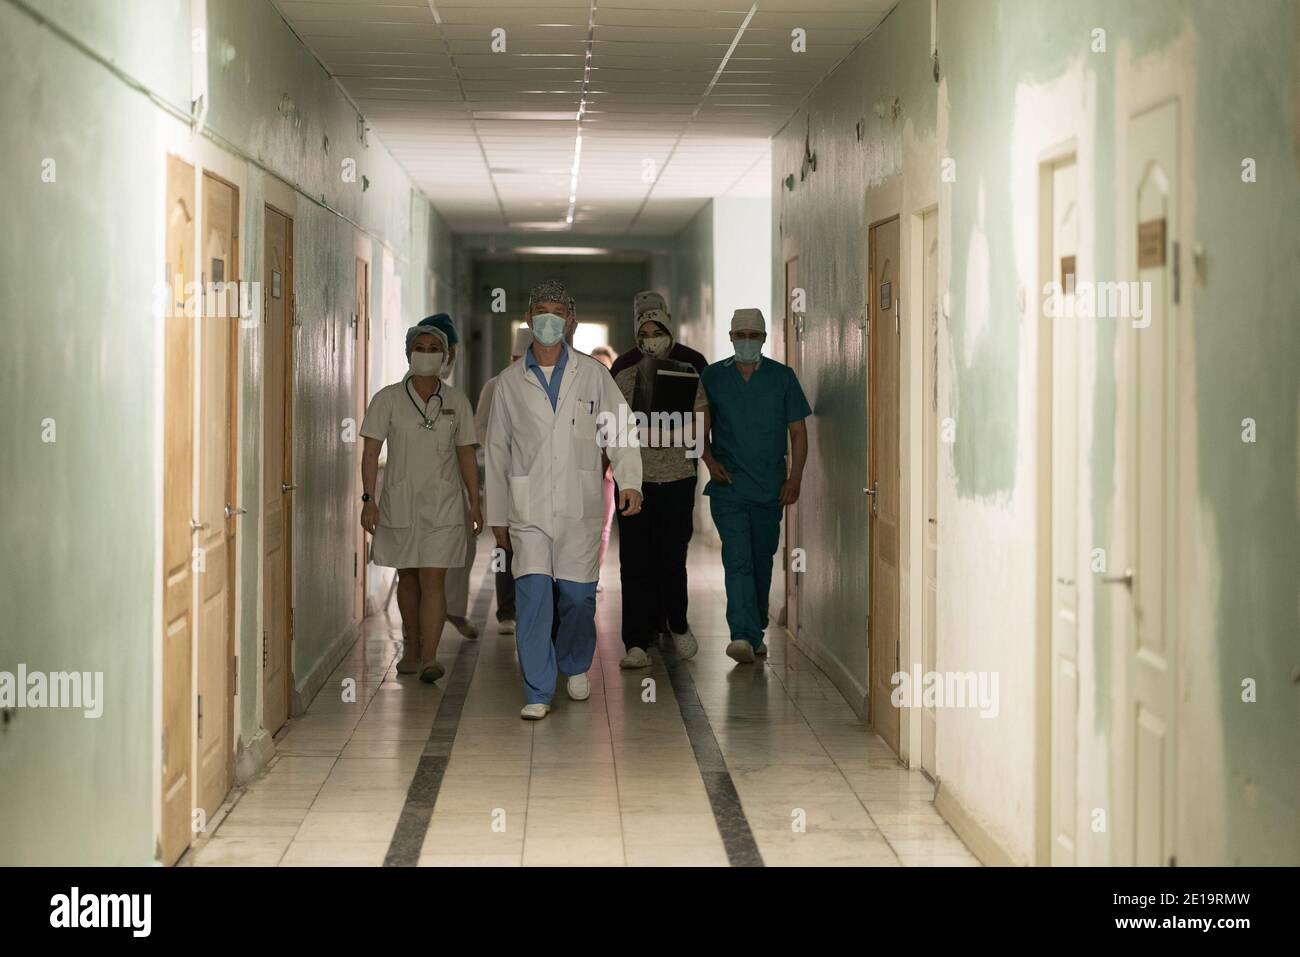 Walking along the hospital corridor group of doctors and nurses. A team of medical workers in uniforms walking along hall. City Hospital. May, 2020 Stock Photo